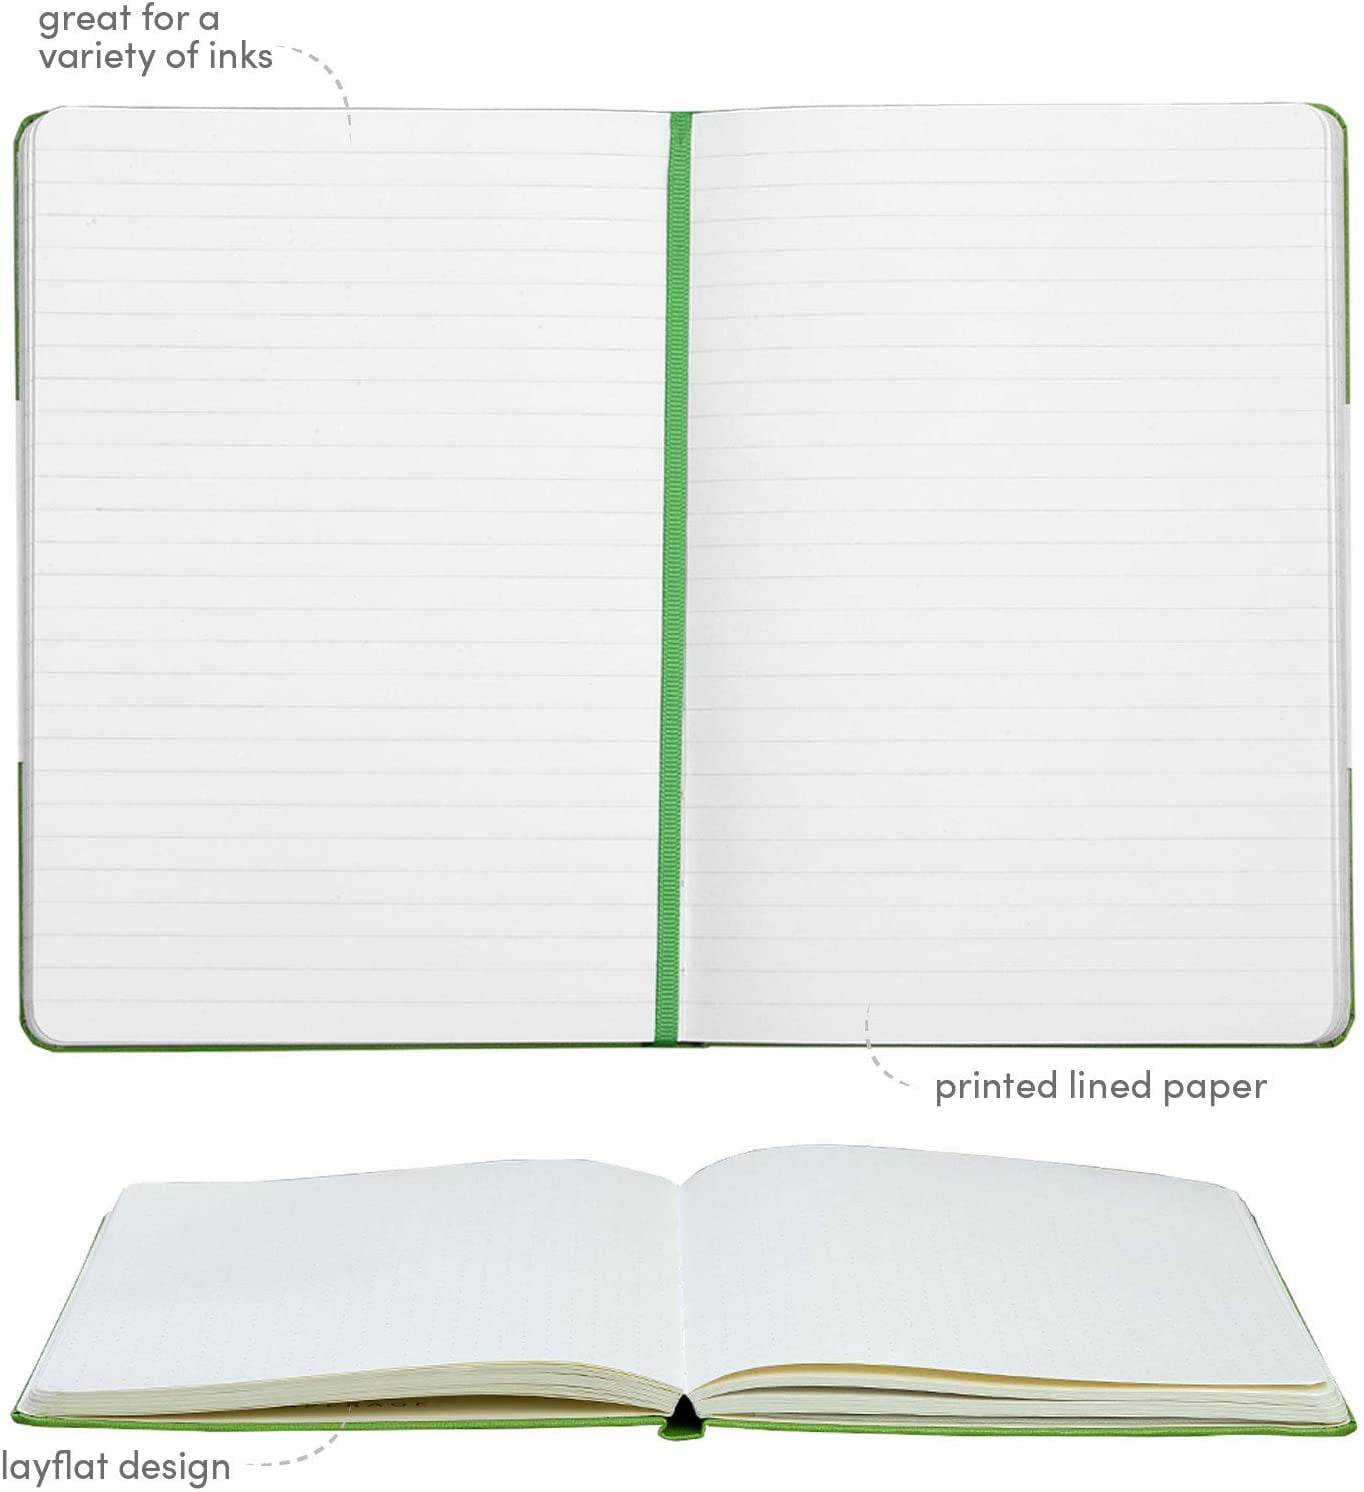 PAPERAGE Lined Journal Notebook, … curated on LTK